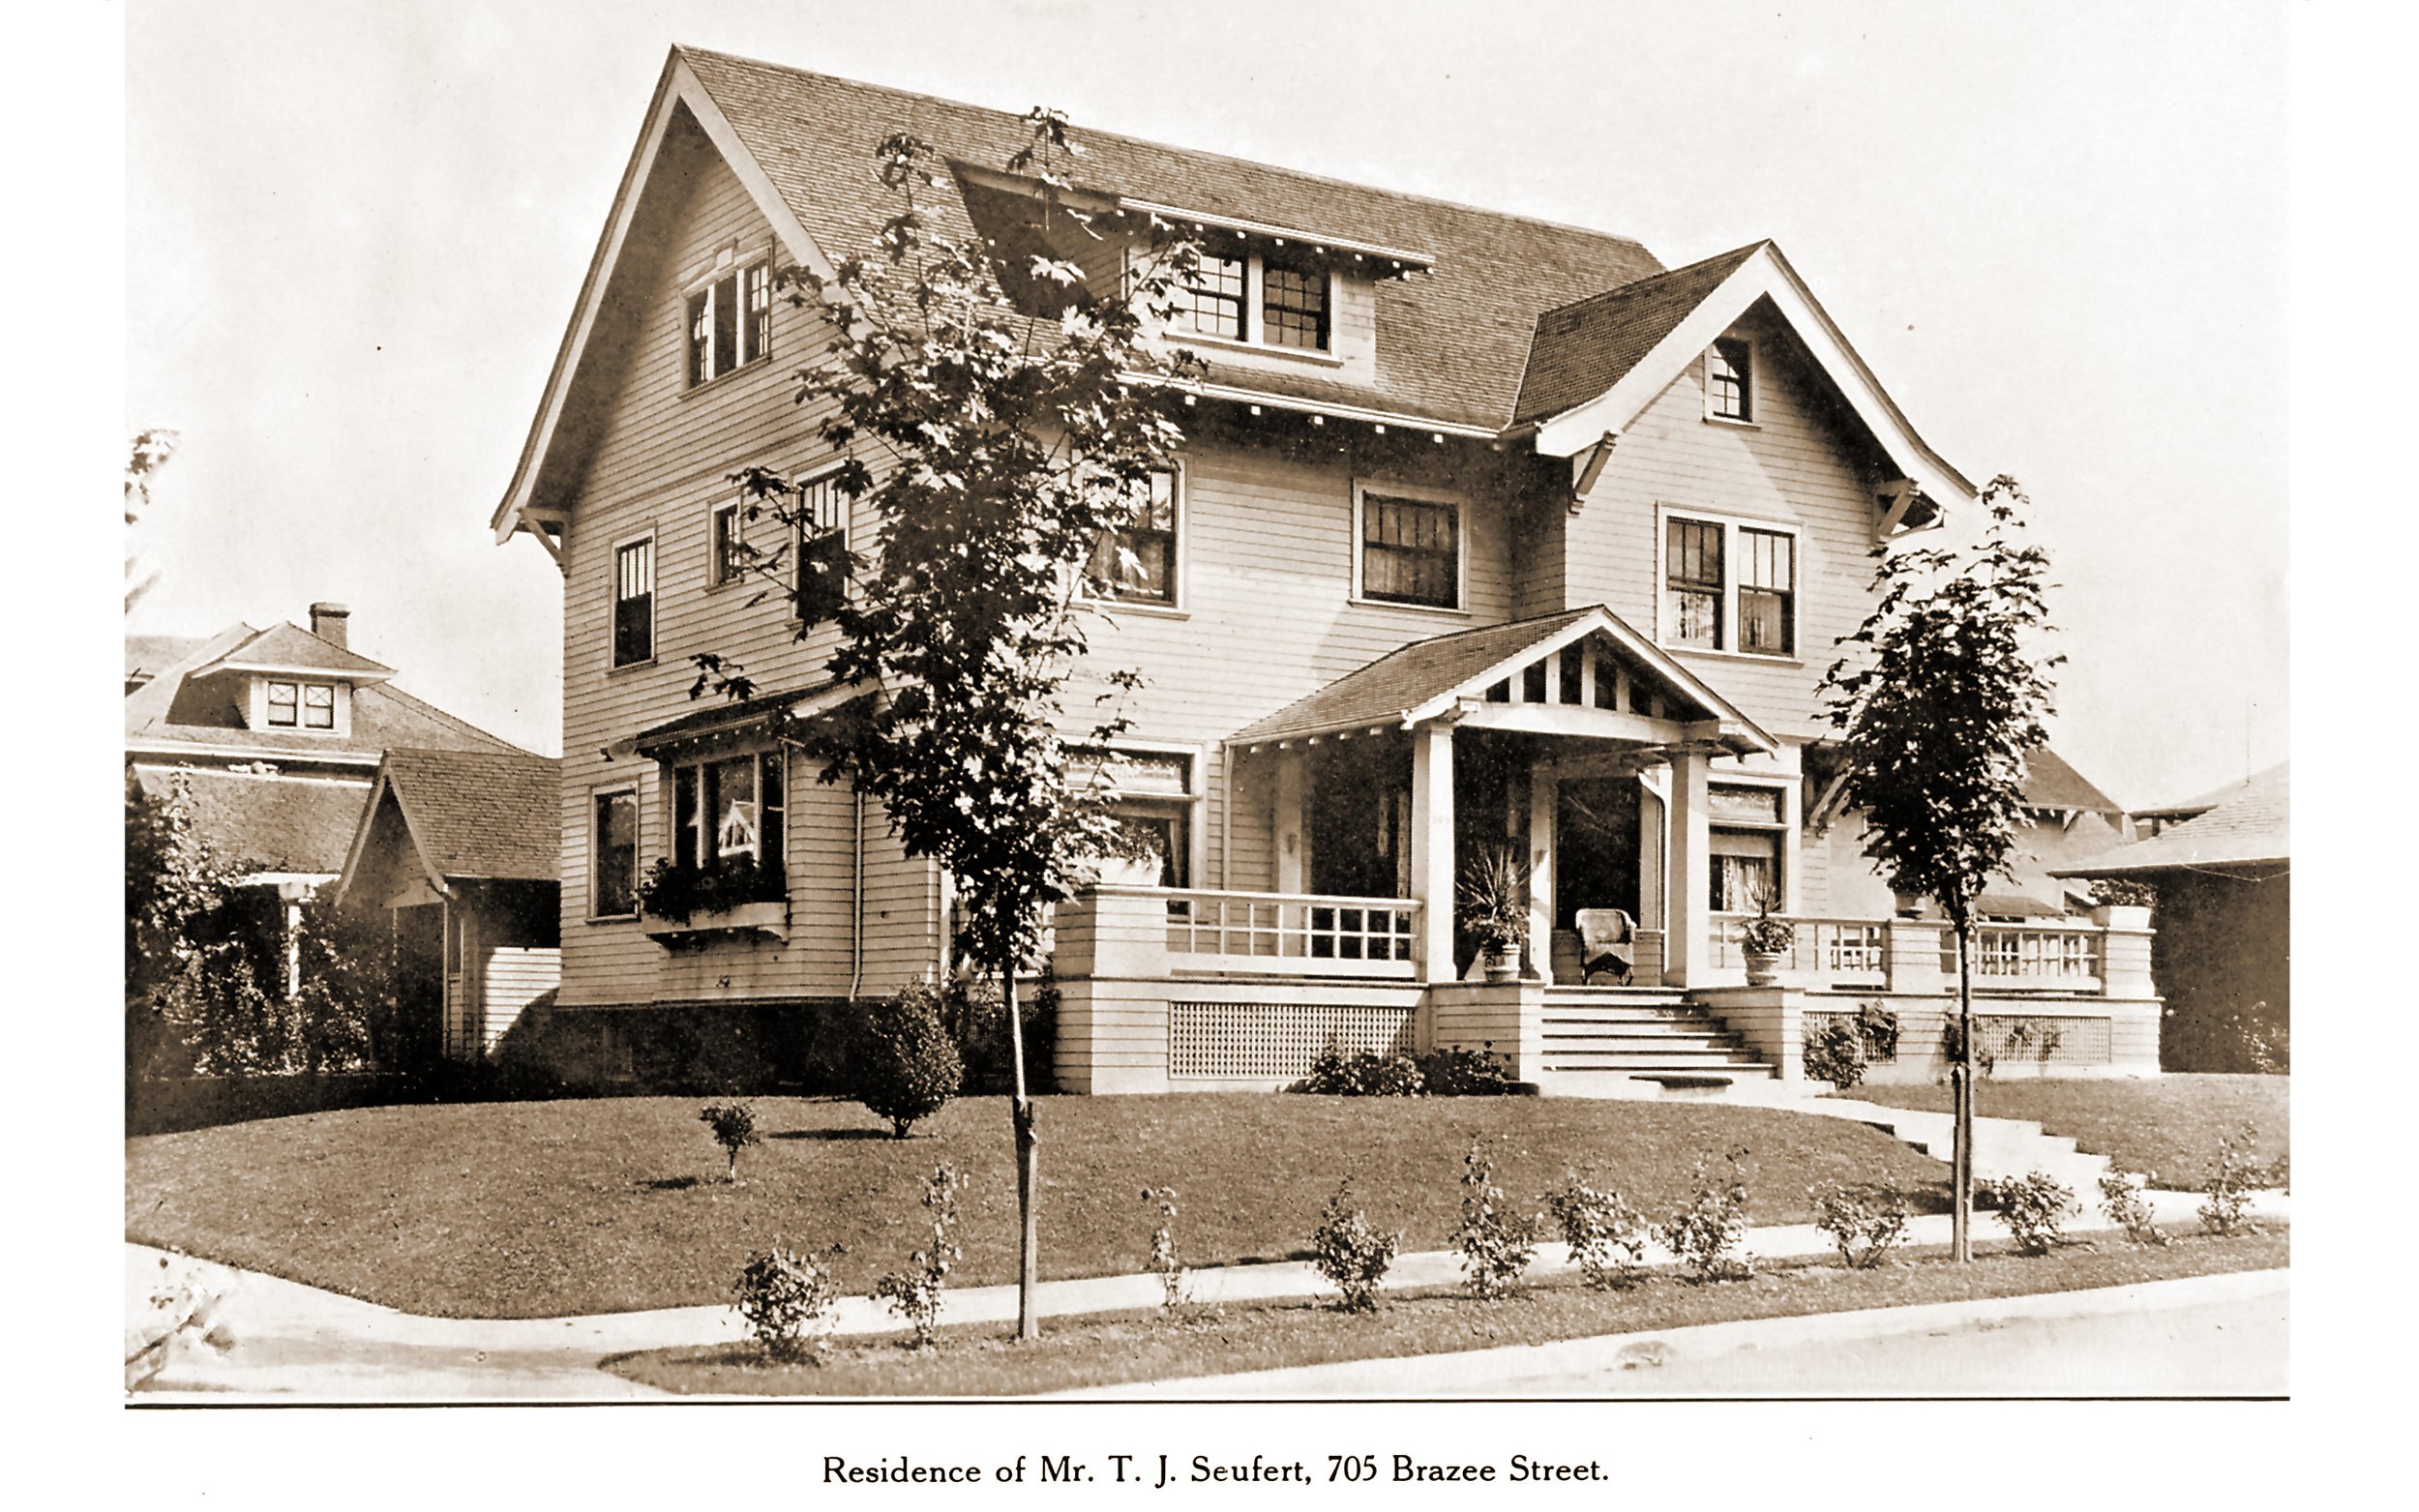  This home still stands on the corner of NE 20th and NE Brazee.&nbsp; The lovely wooden veranda, however, has not survived. Photo ca. 1911. 